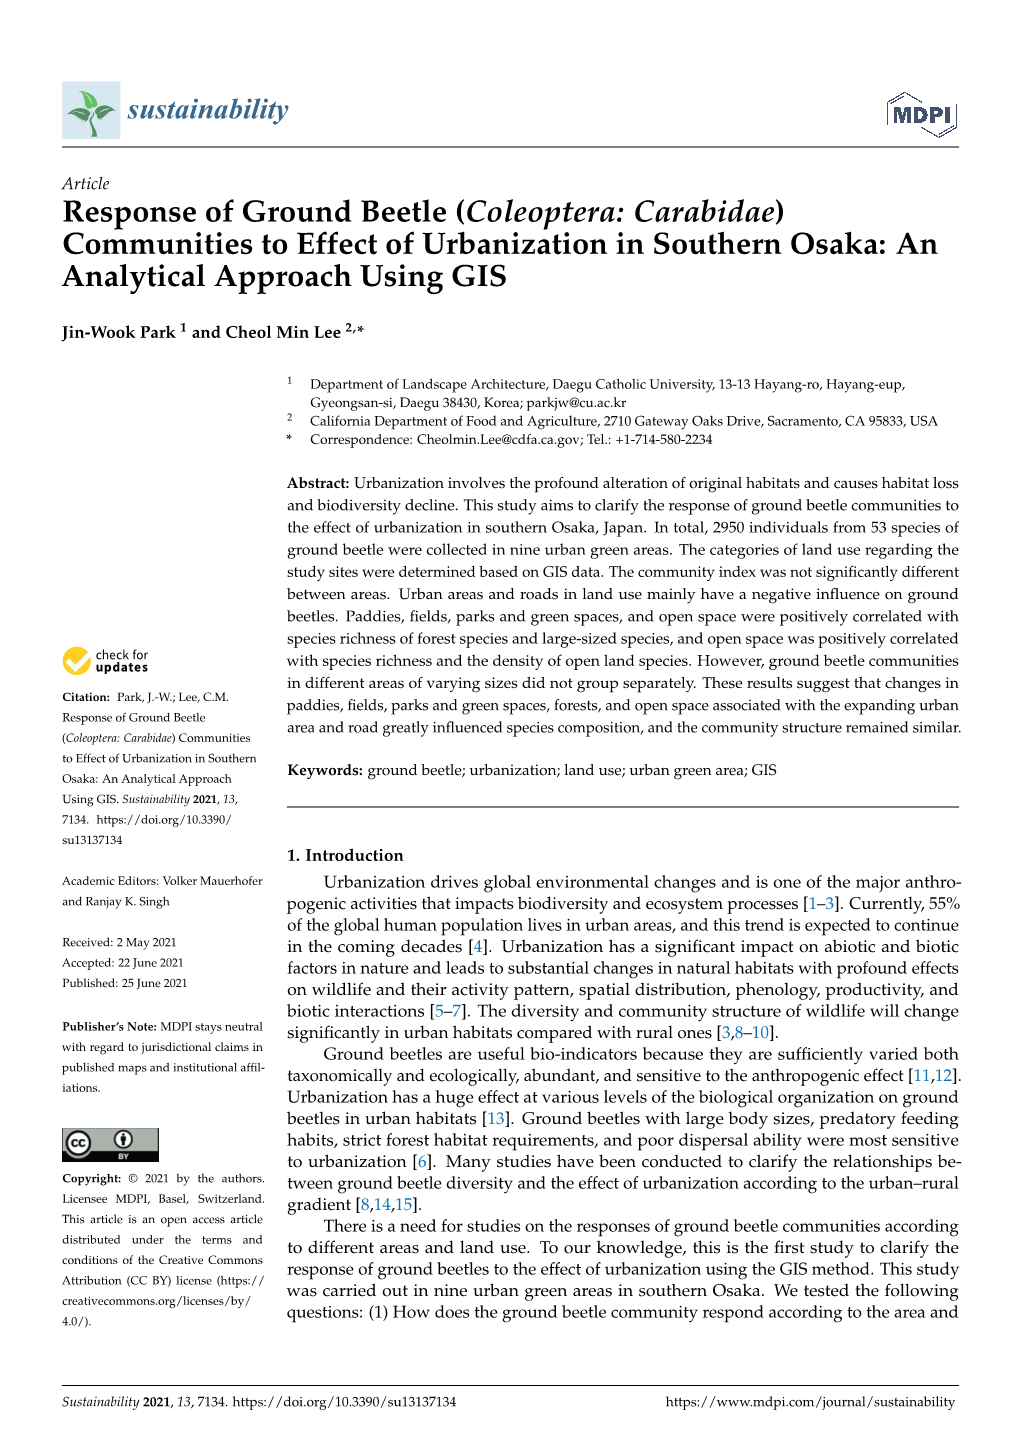 Response of Ground Beetle (Coleoptera: Carabidae) Communities to Effect of Urbanization in Southern Osaka: an Analytical Approach Using GIS